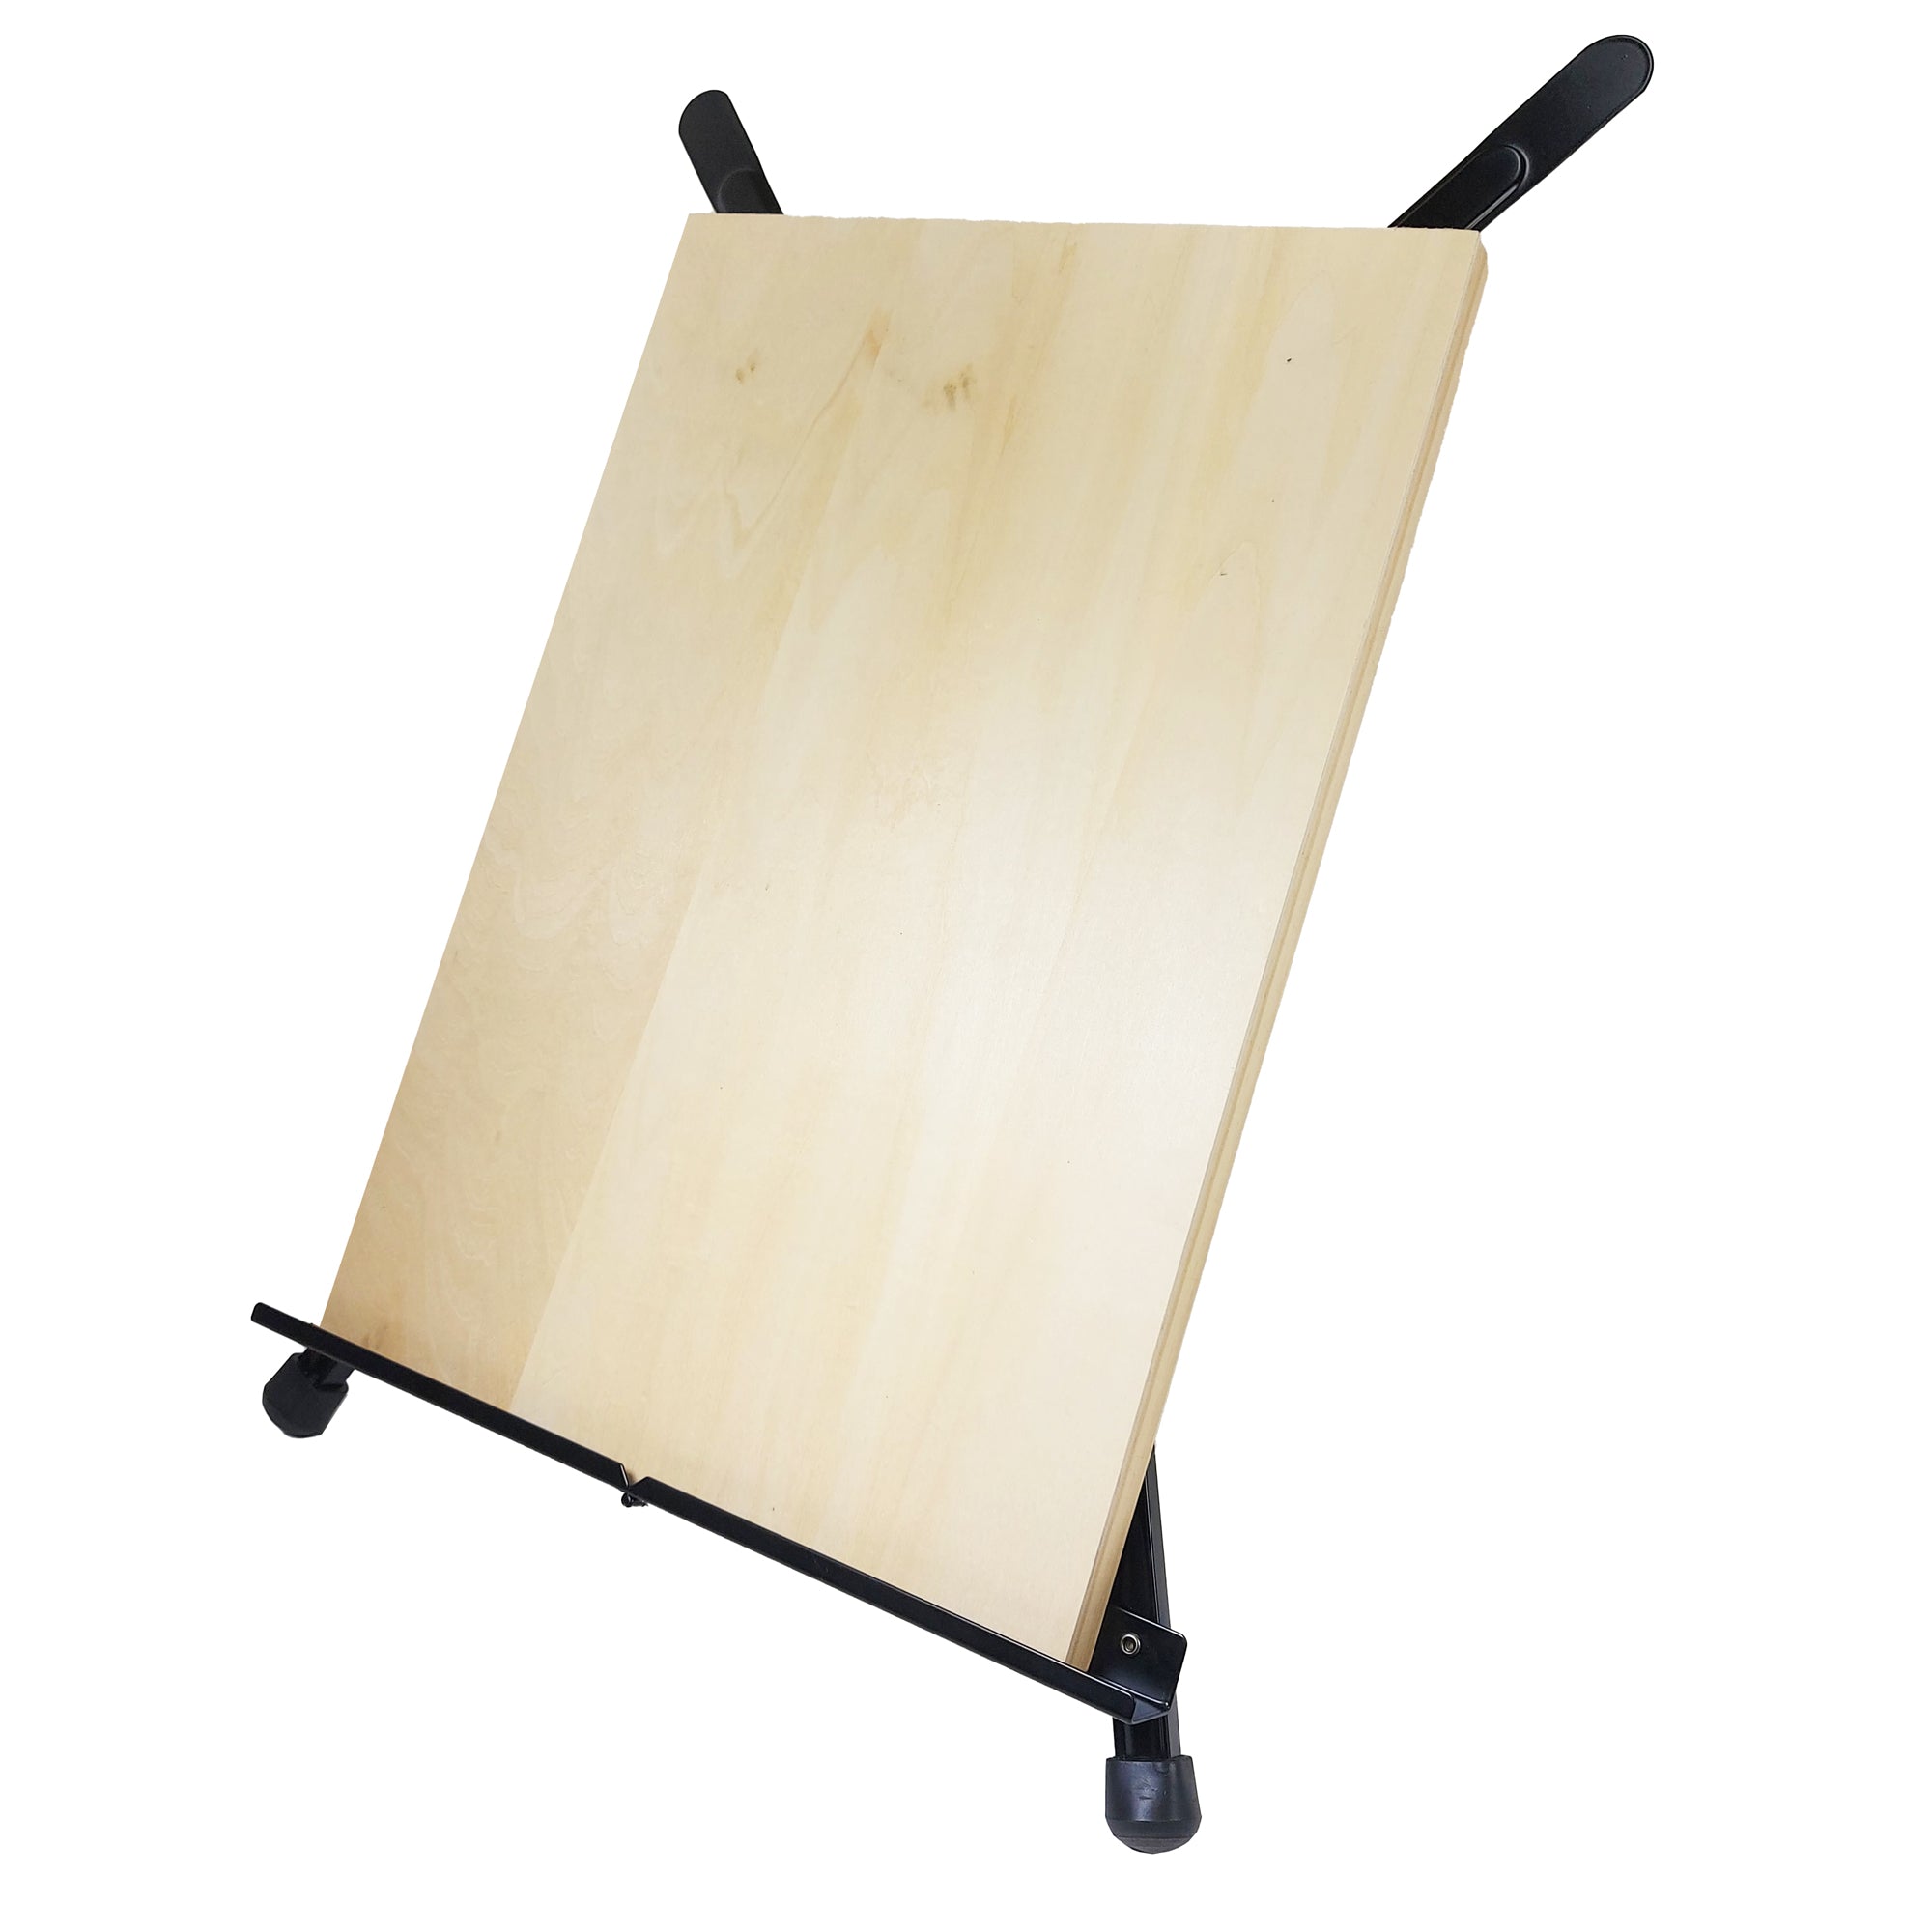 Artist's Compact Table Top Easel holding example wooden panel